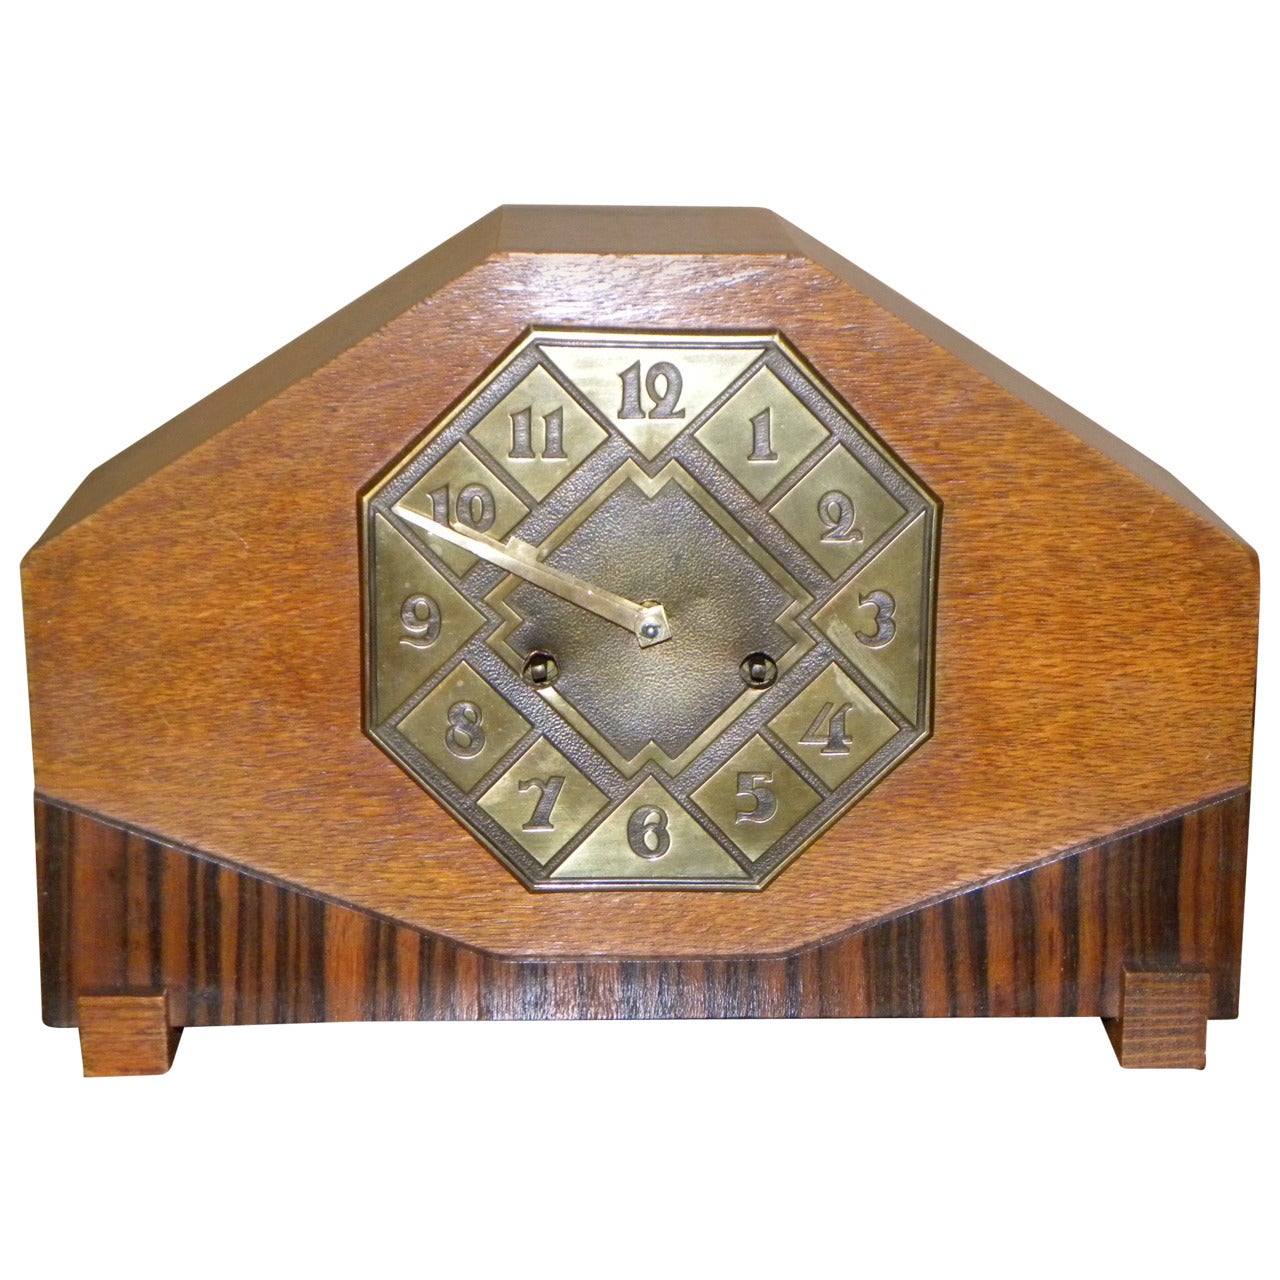 Striking Art Deco Mantle Clock with Mixed Wood and Brass Detail For Sale